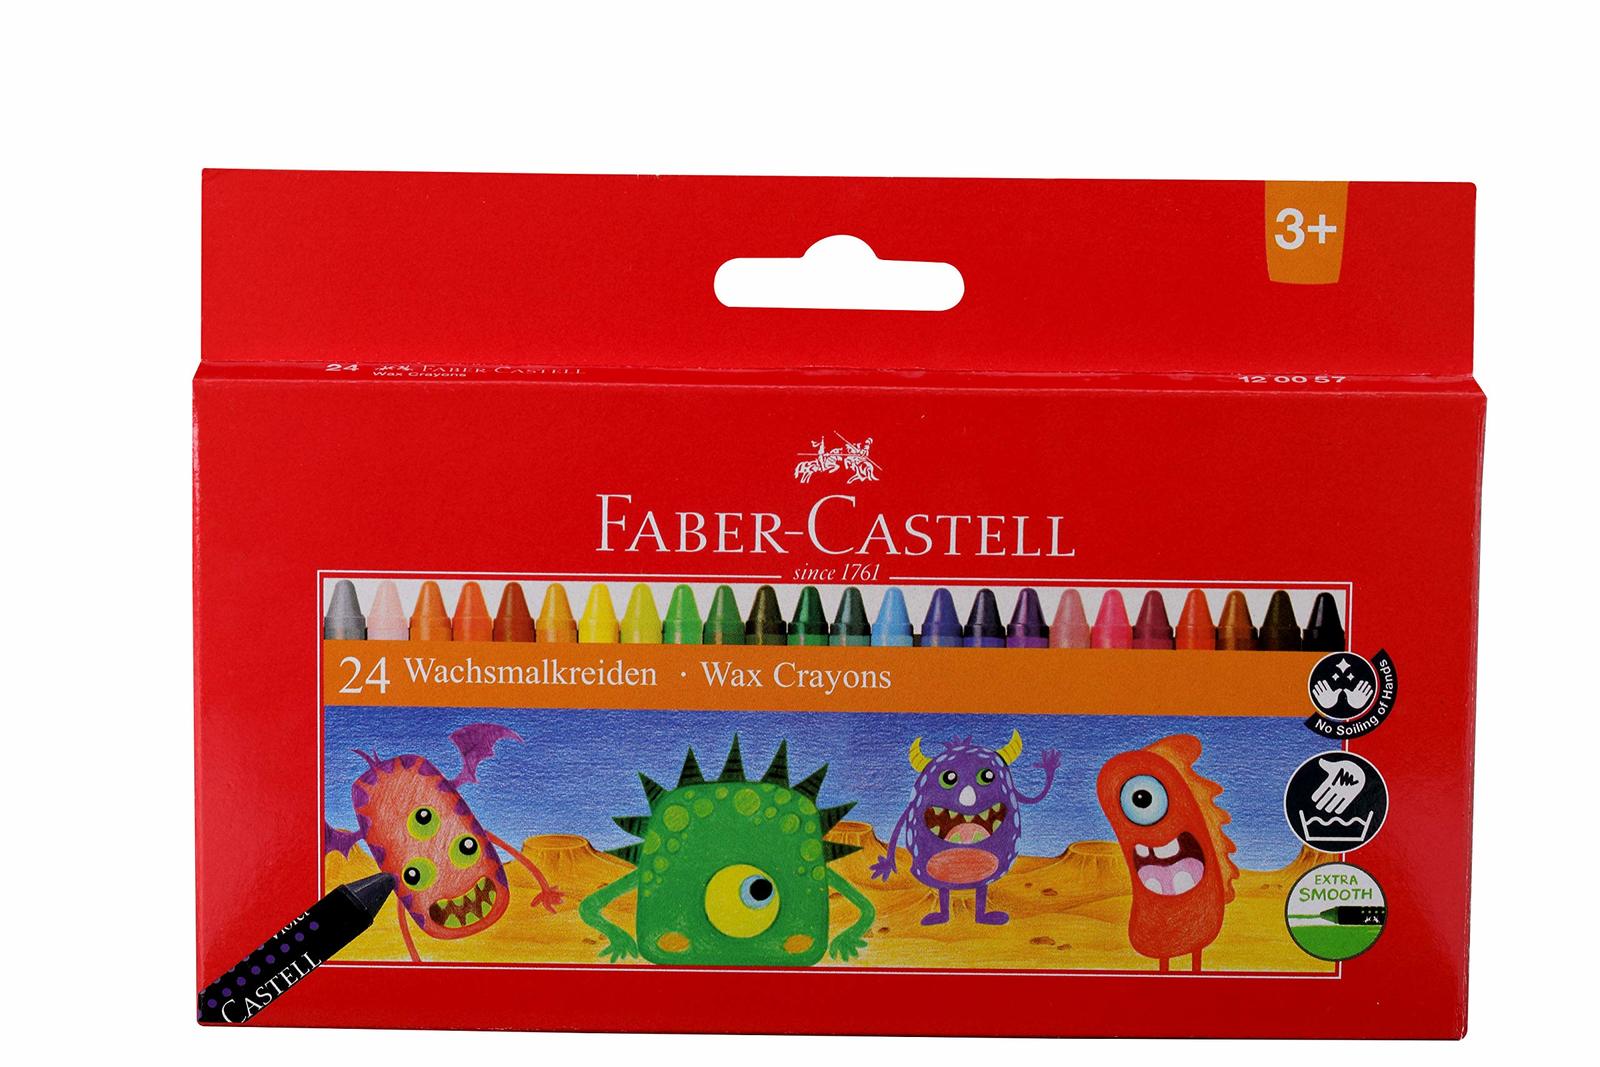 Faber Castell Wax Crayons - 24 Shades - $11.37